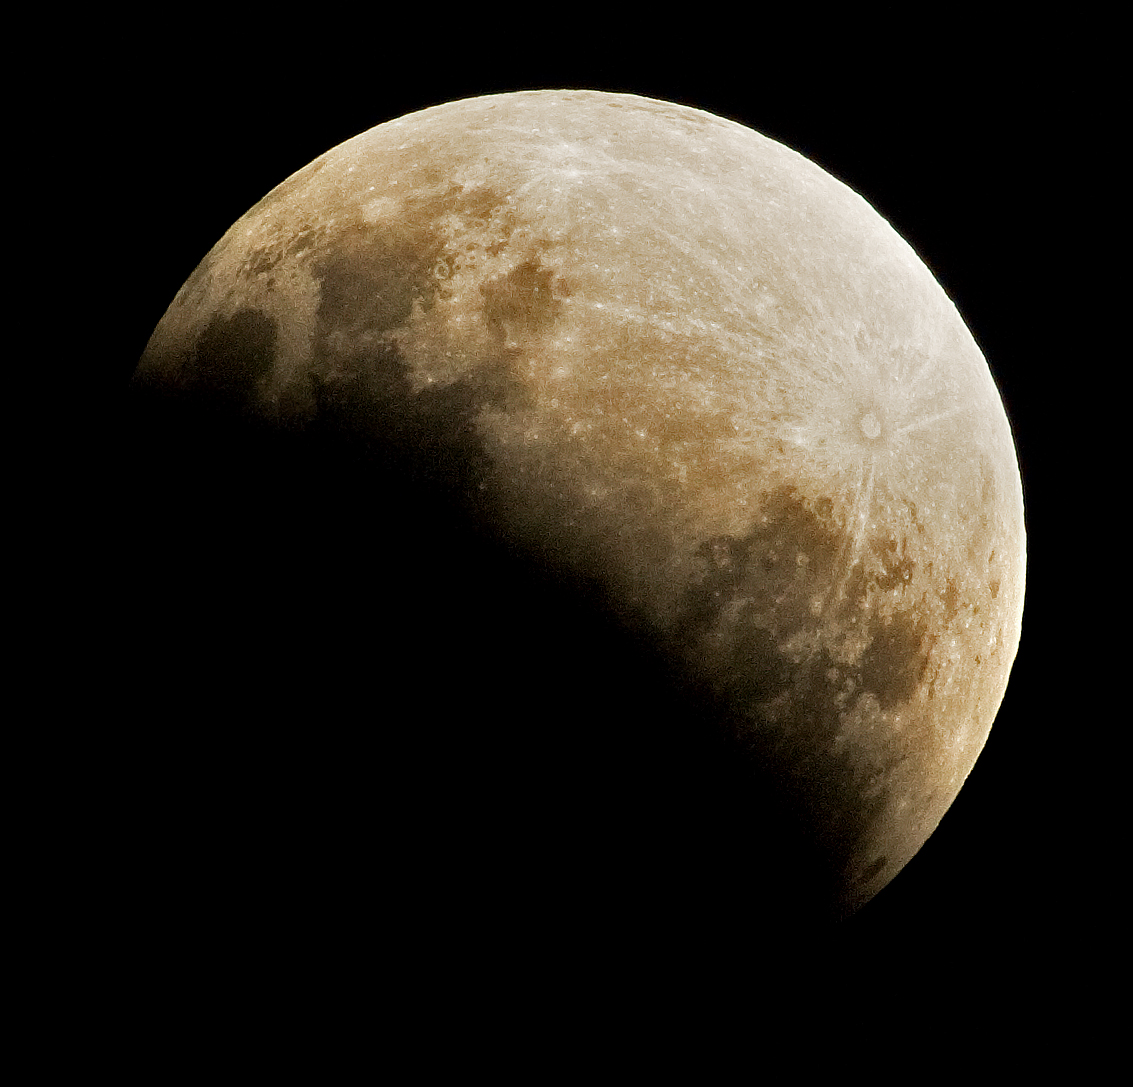 How to Capture the Upcoming Lunar Eclipse in Egypt